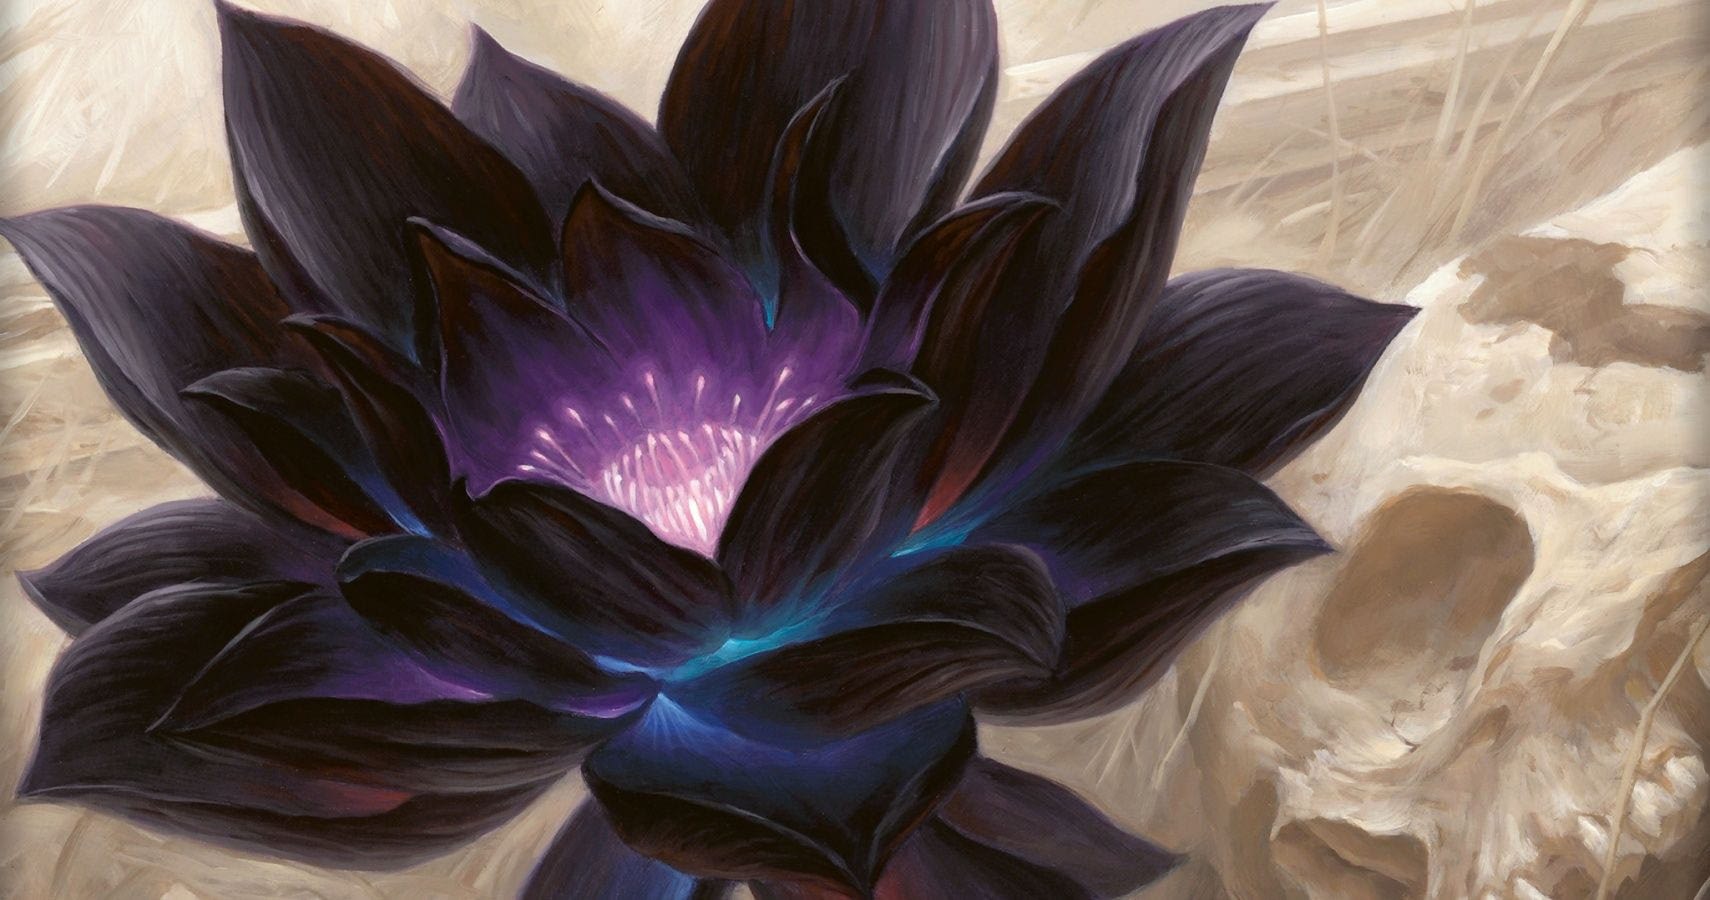 Black Lotus in classic world of warcraft after patch changes